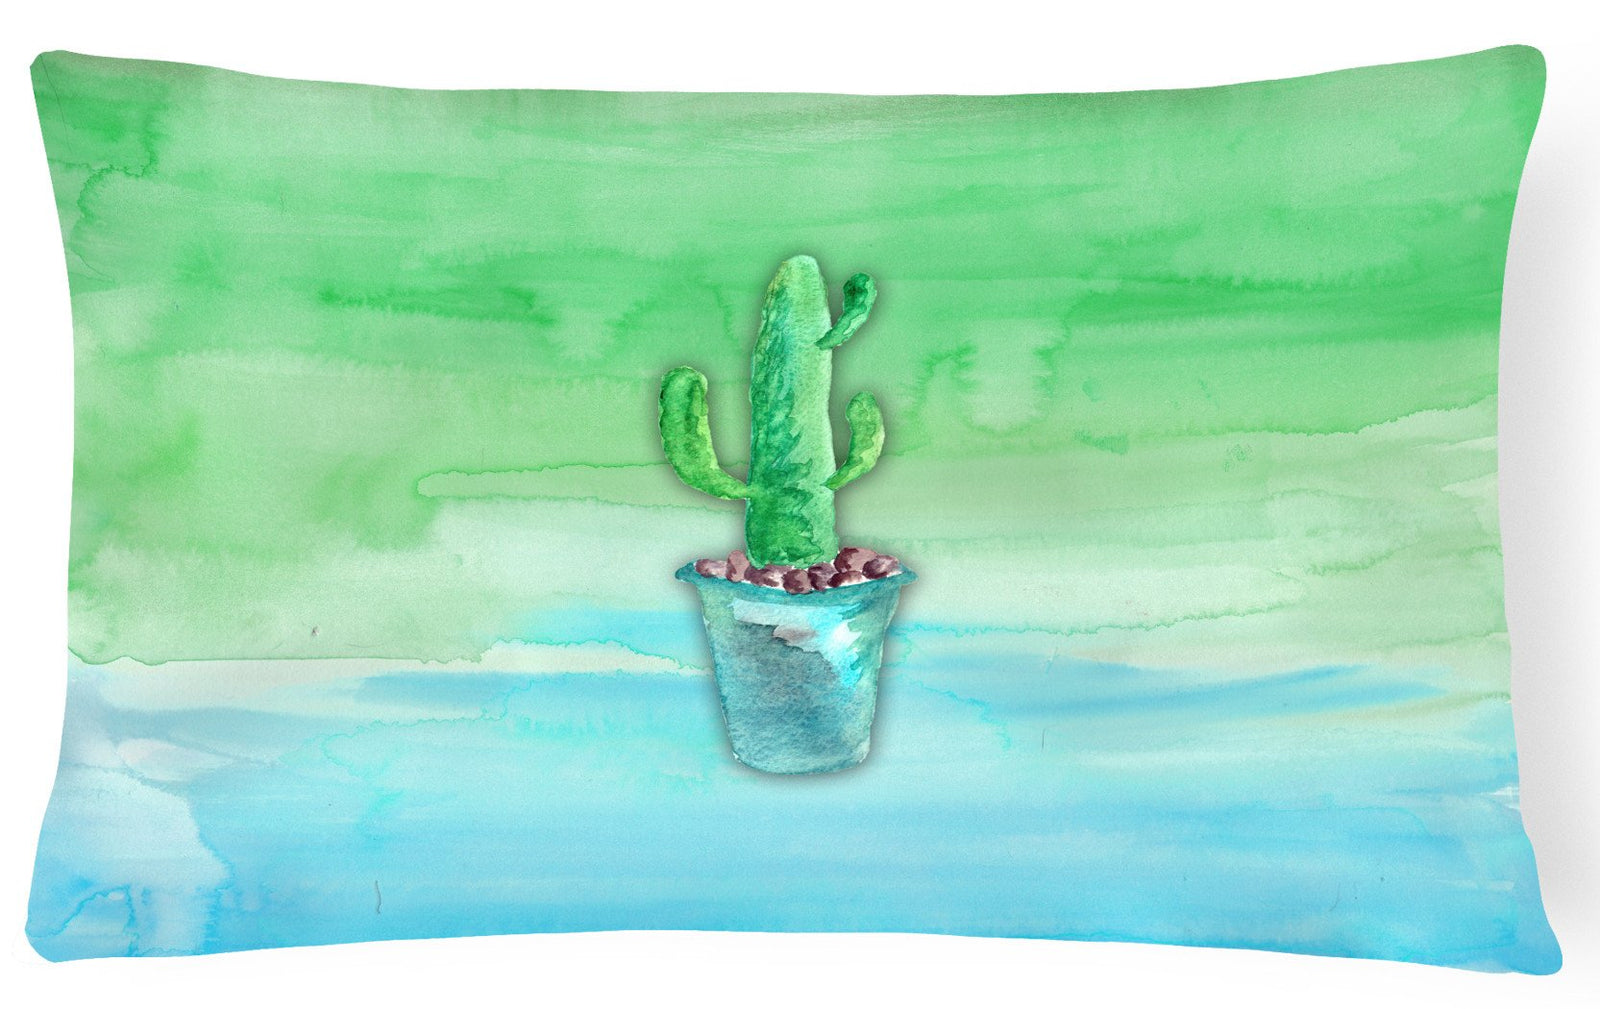 Cactus Teal and Green Watercolor Canvas Fabric Decorative Pillow BB7362PW1216 by Caroline's Treasures